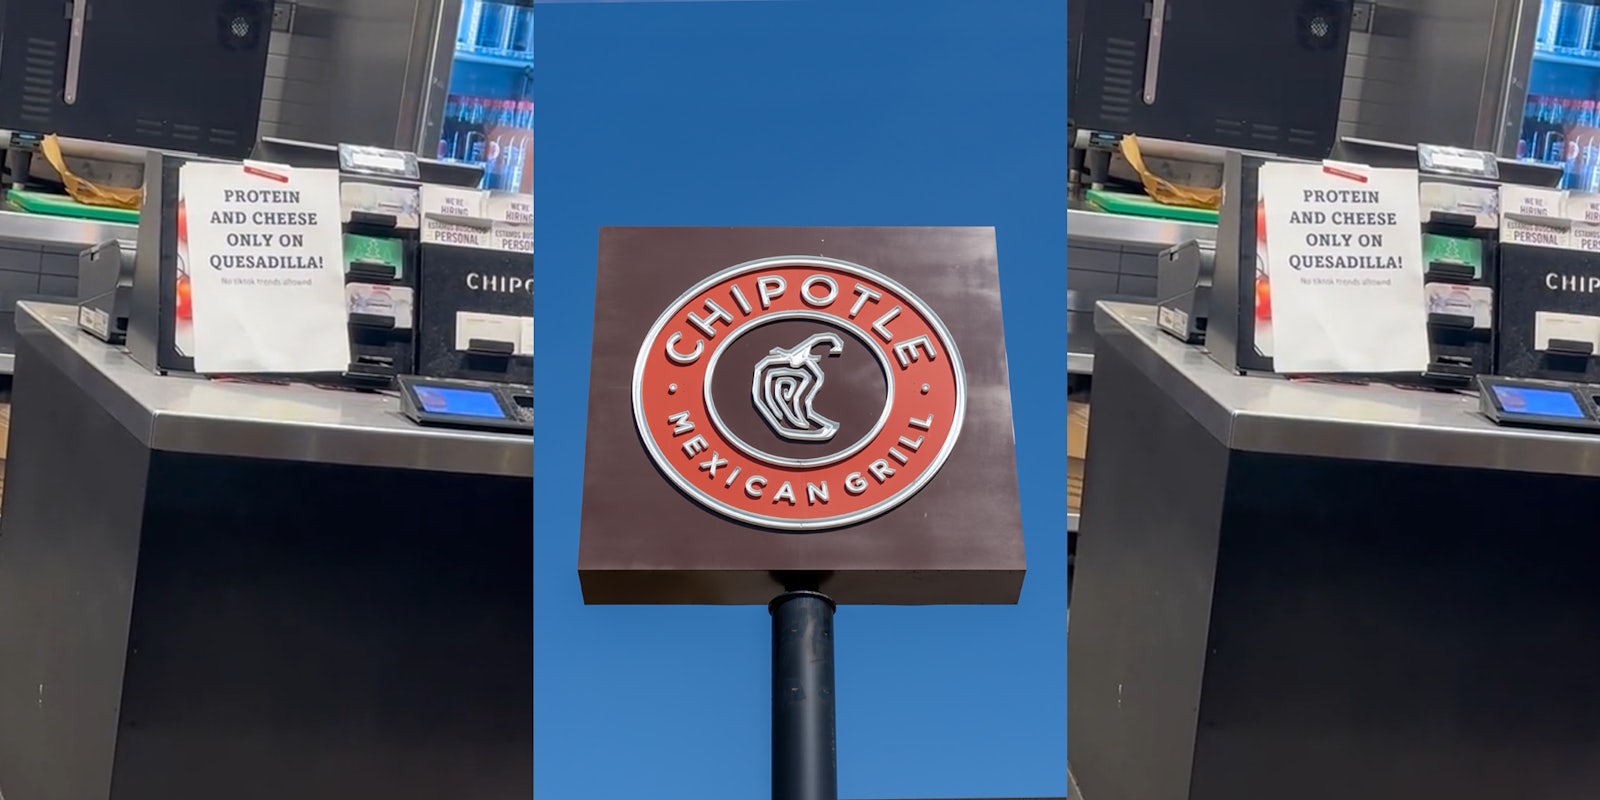 sign on Chipotle counter 'PROTEIN AND CHEESE ONLY ON QUESADILLA' (l) Chipotle sign in front of blue sky (c) sign on Chipotle counter 'PROTEIN AND CHEESE ONLY ON QUESADILLA' (r)